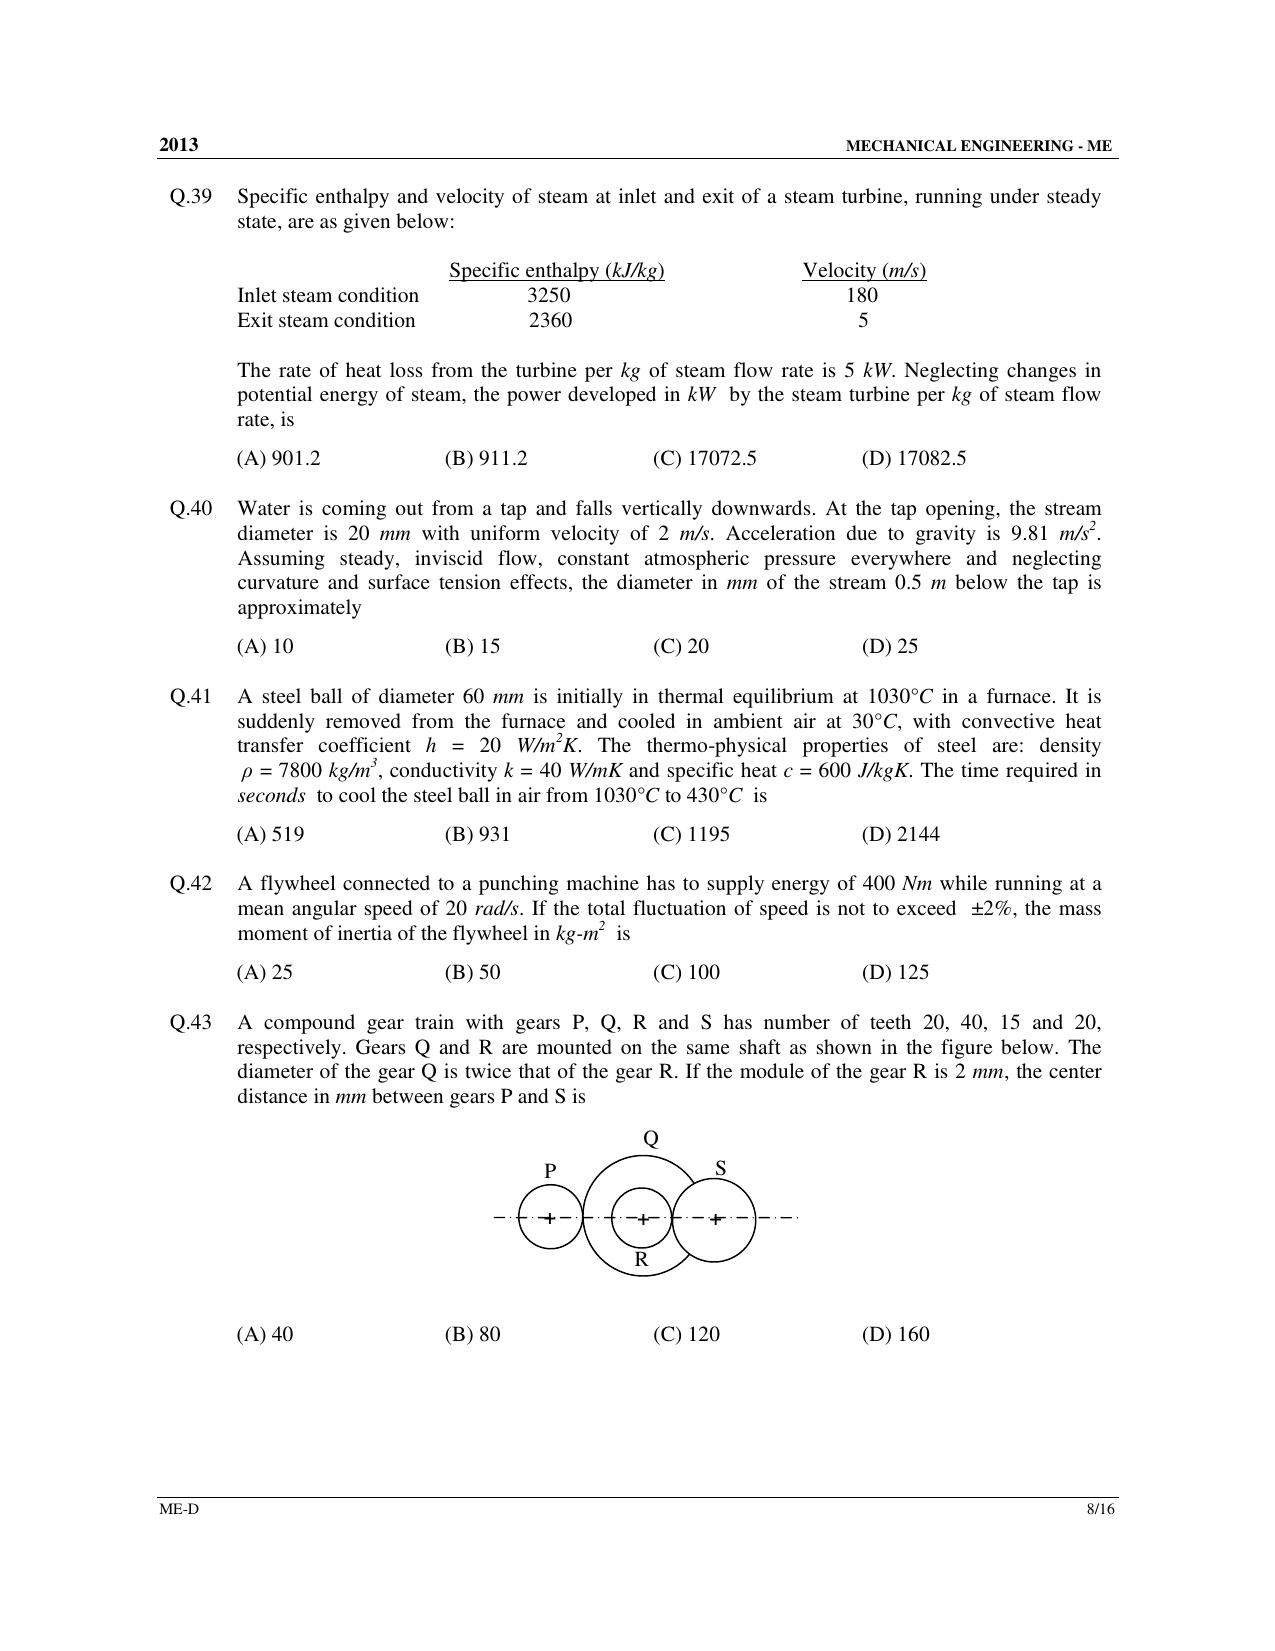 GATE 2013 Mechanical Engineering (ME) Question Paper with Answer Key - Page 51